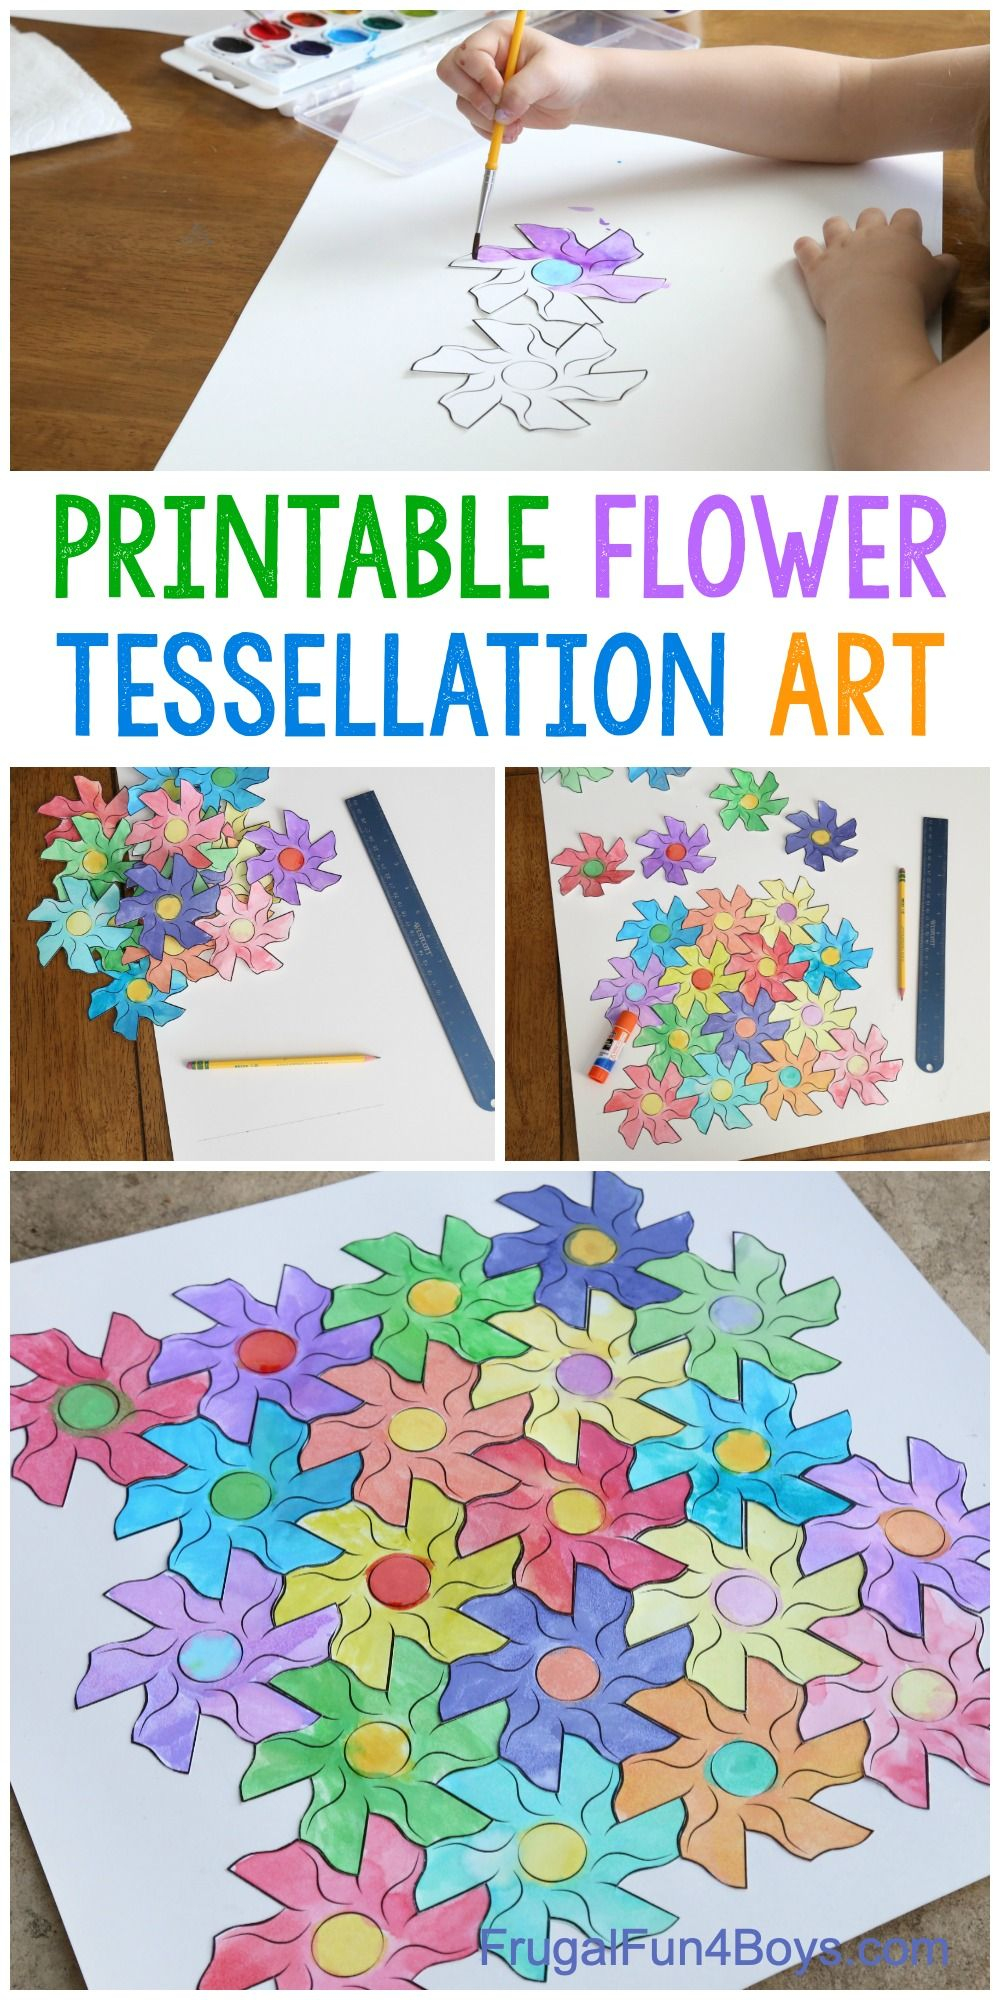 Flower Tessellation Activity For Kids (With A Printable